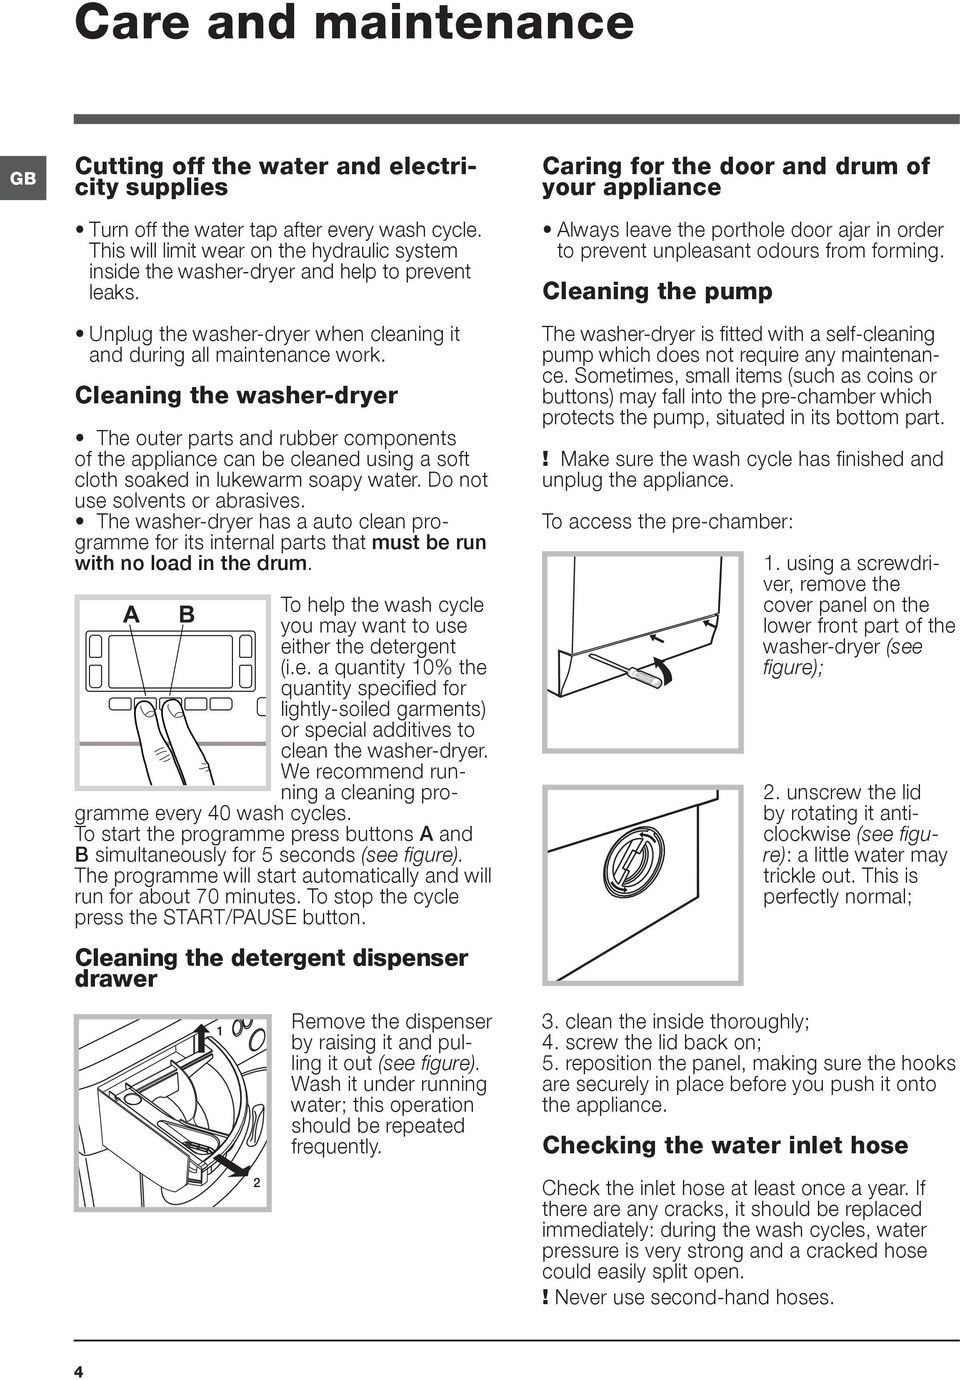 Cleaning the washer-dryer The outer parts and rubber components of the appliance can be cleaned using a soft cloth soaked in lukewarm soapy water. Do not use solvents or abrasives.